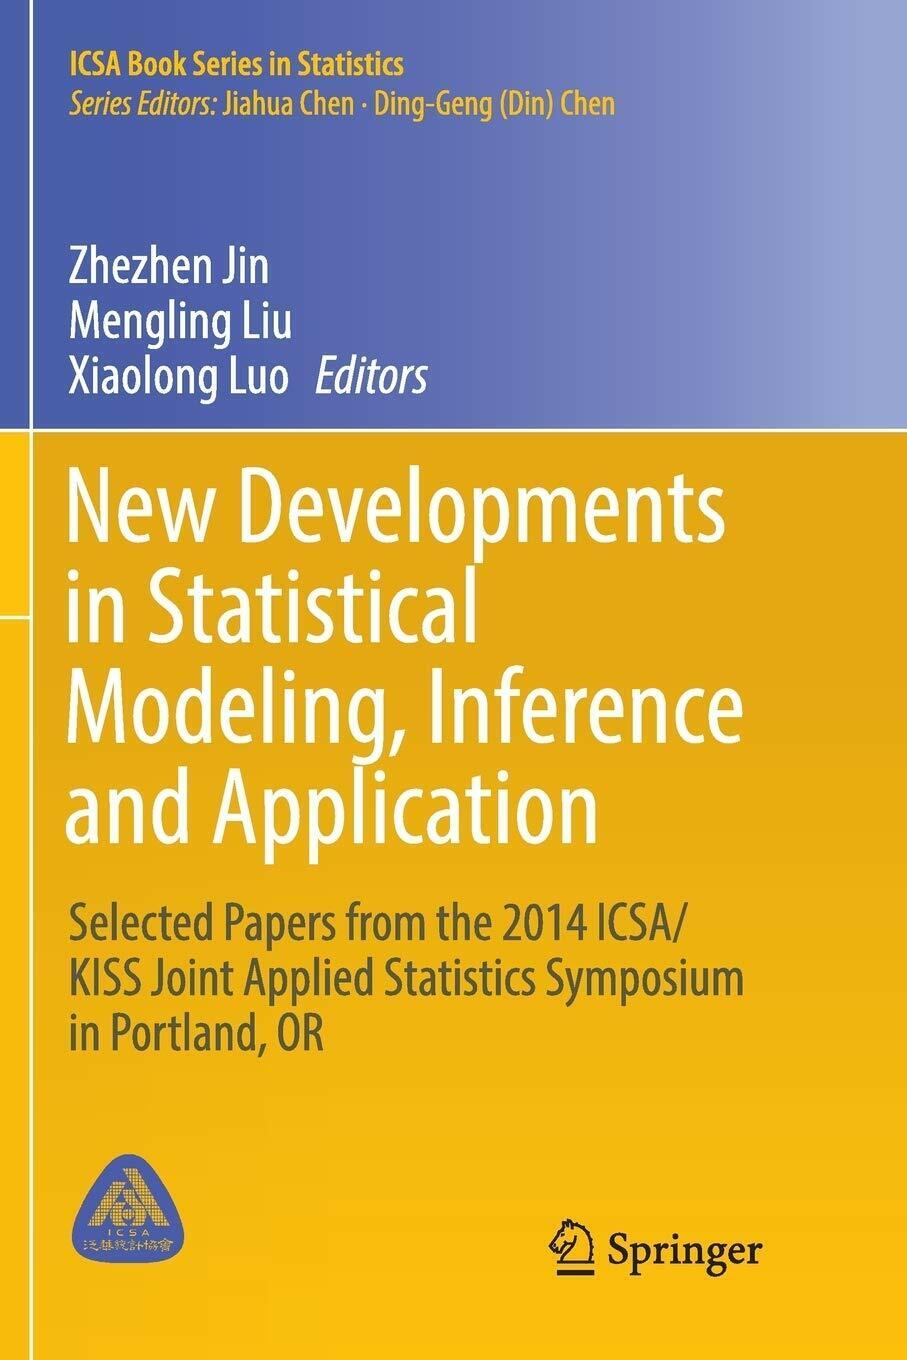 New Developments in Statistical Modeling,Inference and Application-Springer,2018